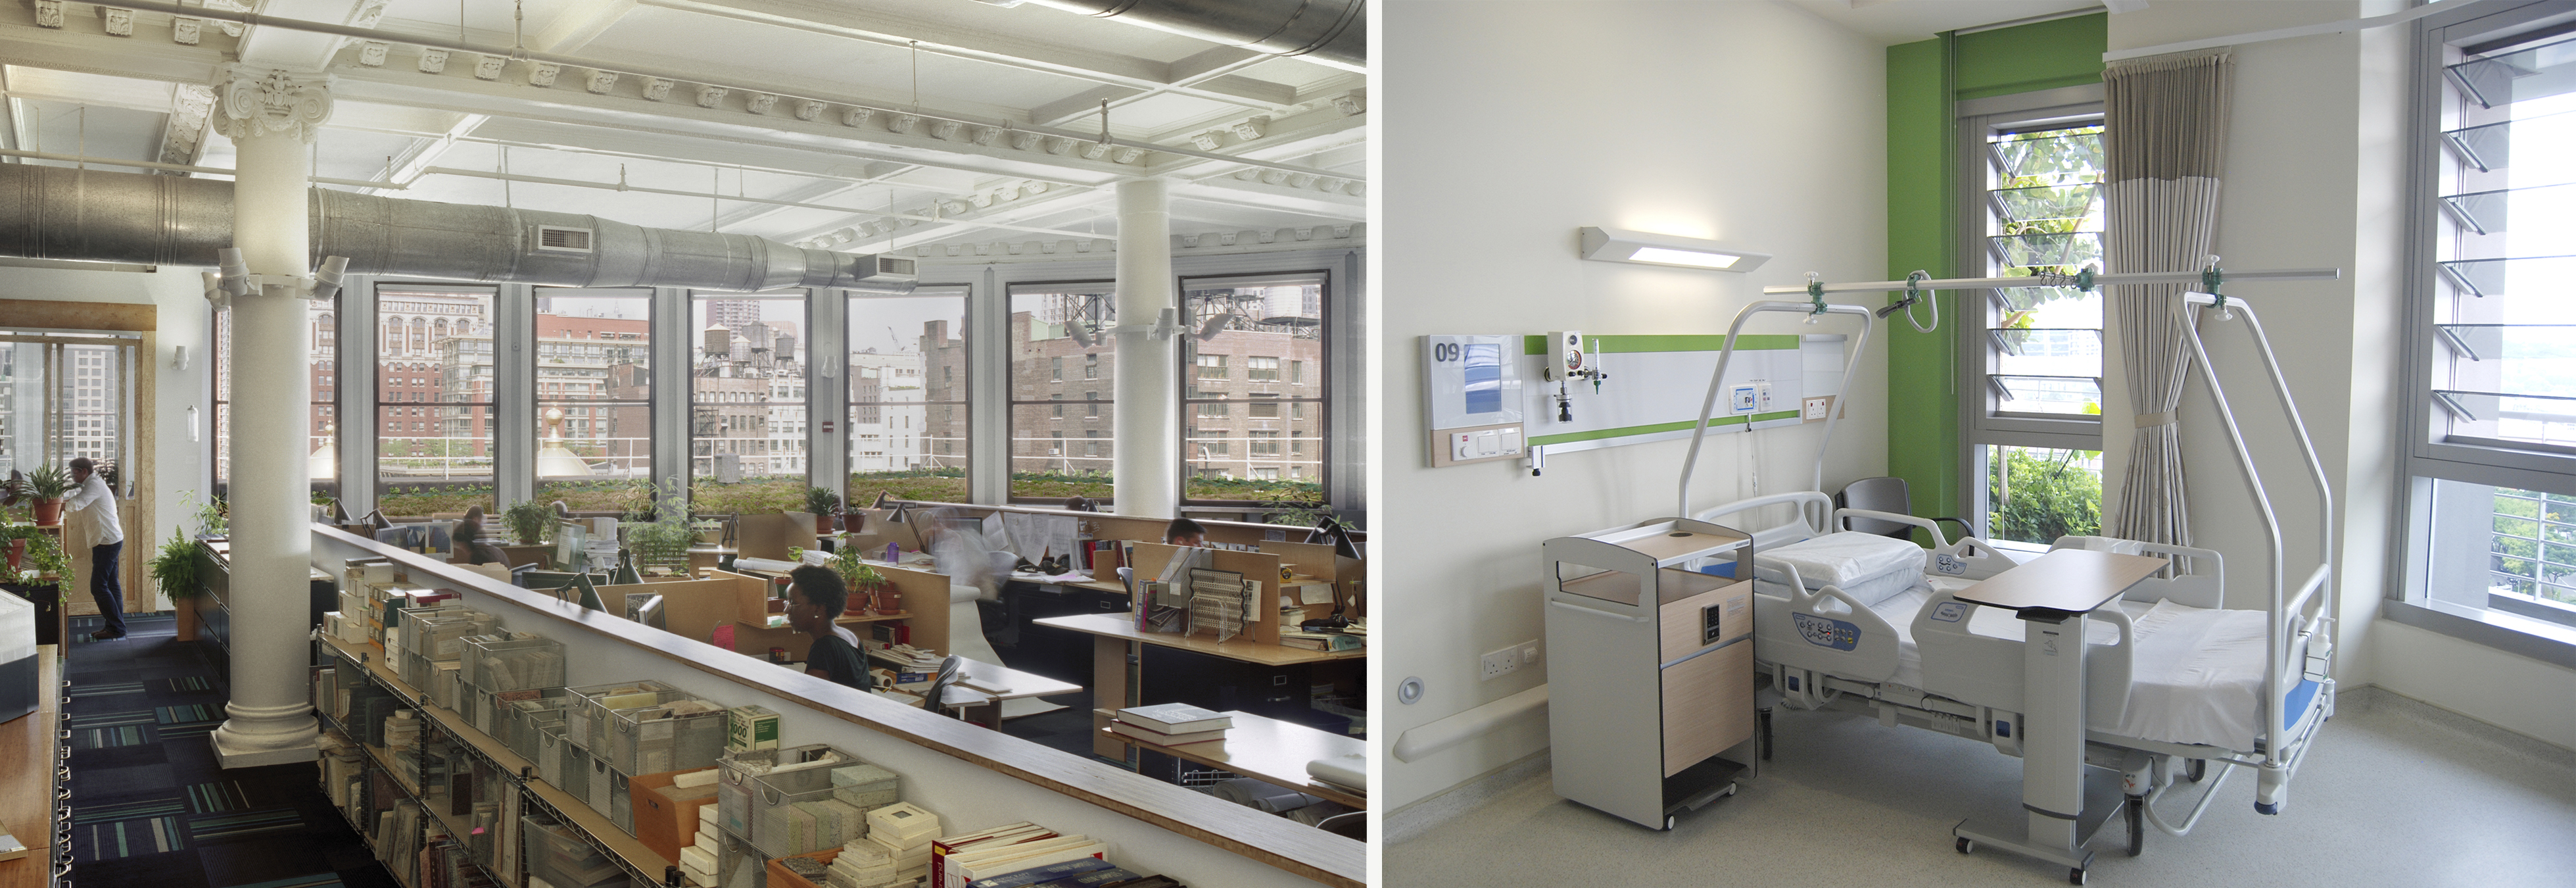 Different strategies are appropriate for different spaces. An office (left) with an open floor plan may serve its employees and clients best by using odors that have universally or culturally positive associations. Private spaces, such as hospital rooms (right), may have more control over local odor, allowing for personal preferences. Left image copyright Bilyana Dimitrova for COOKFOX Architects; right image courtesy of Bill Browning.